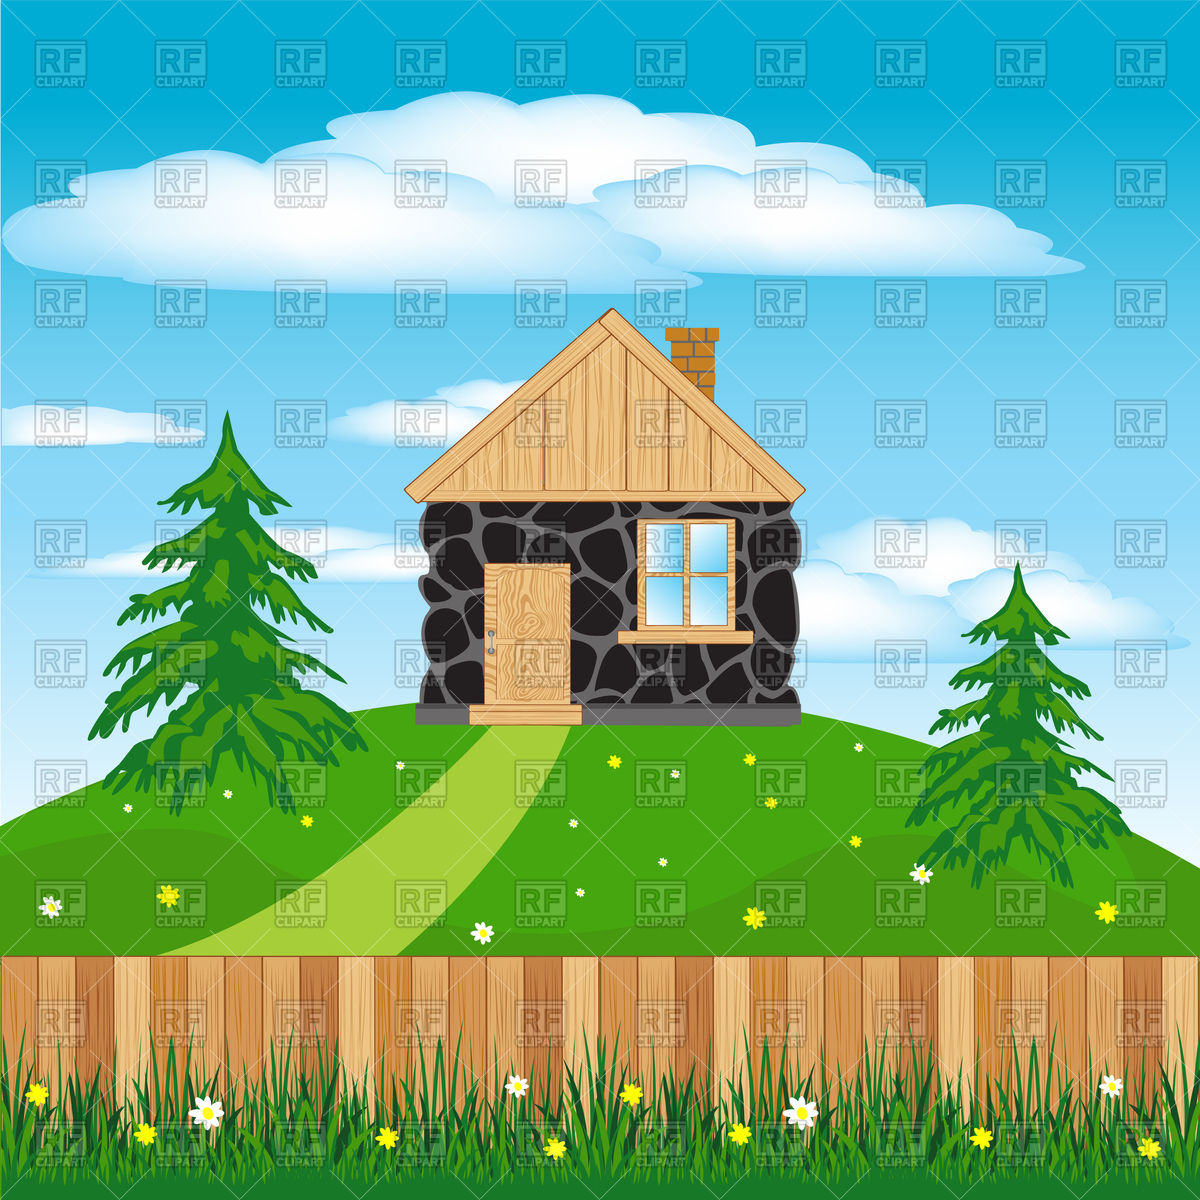 Log cabin and wooden fence.